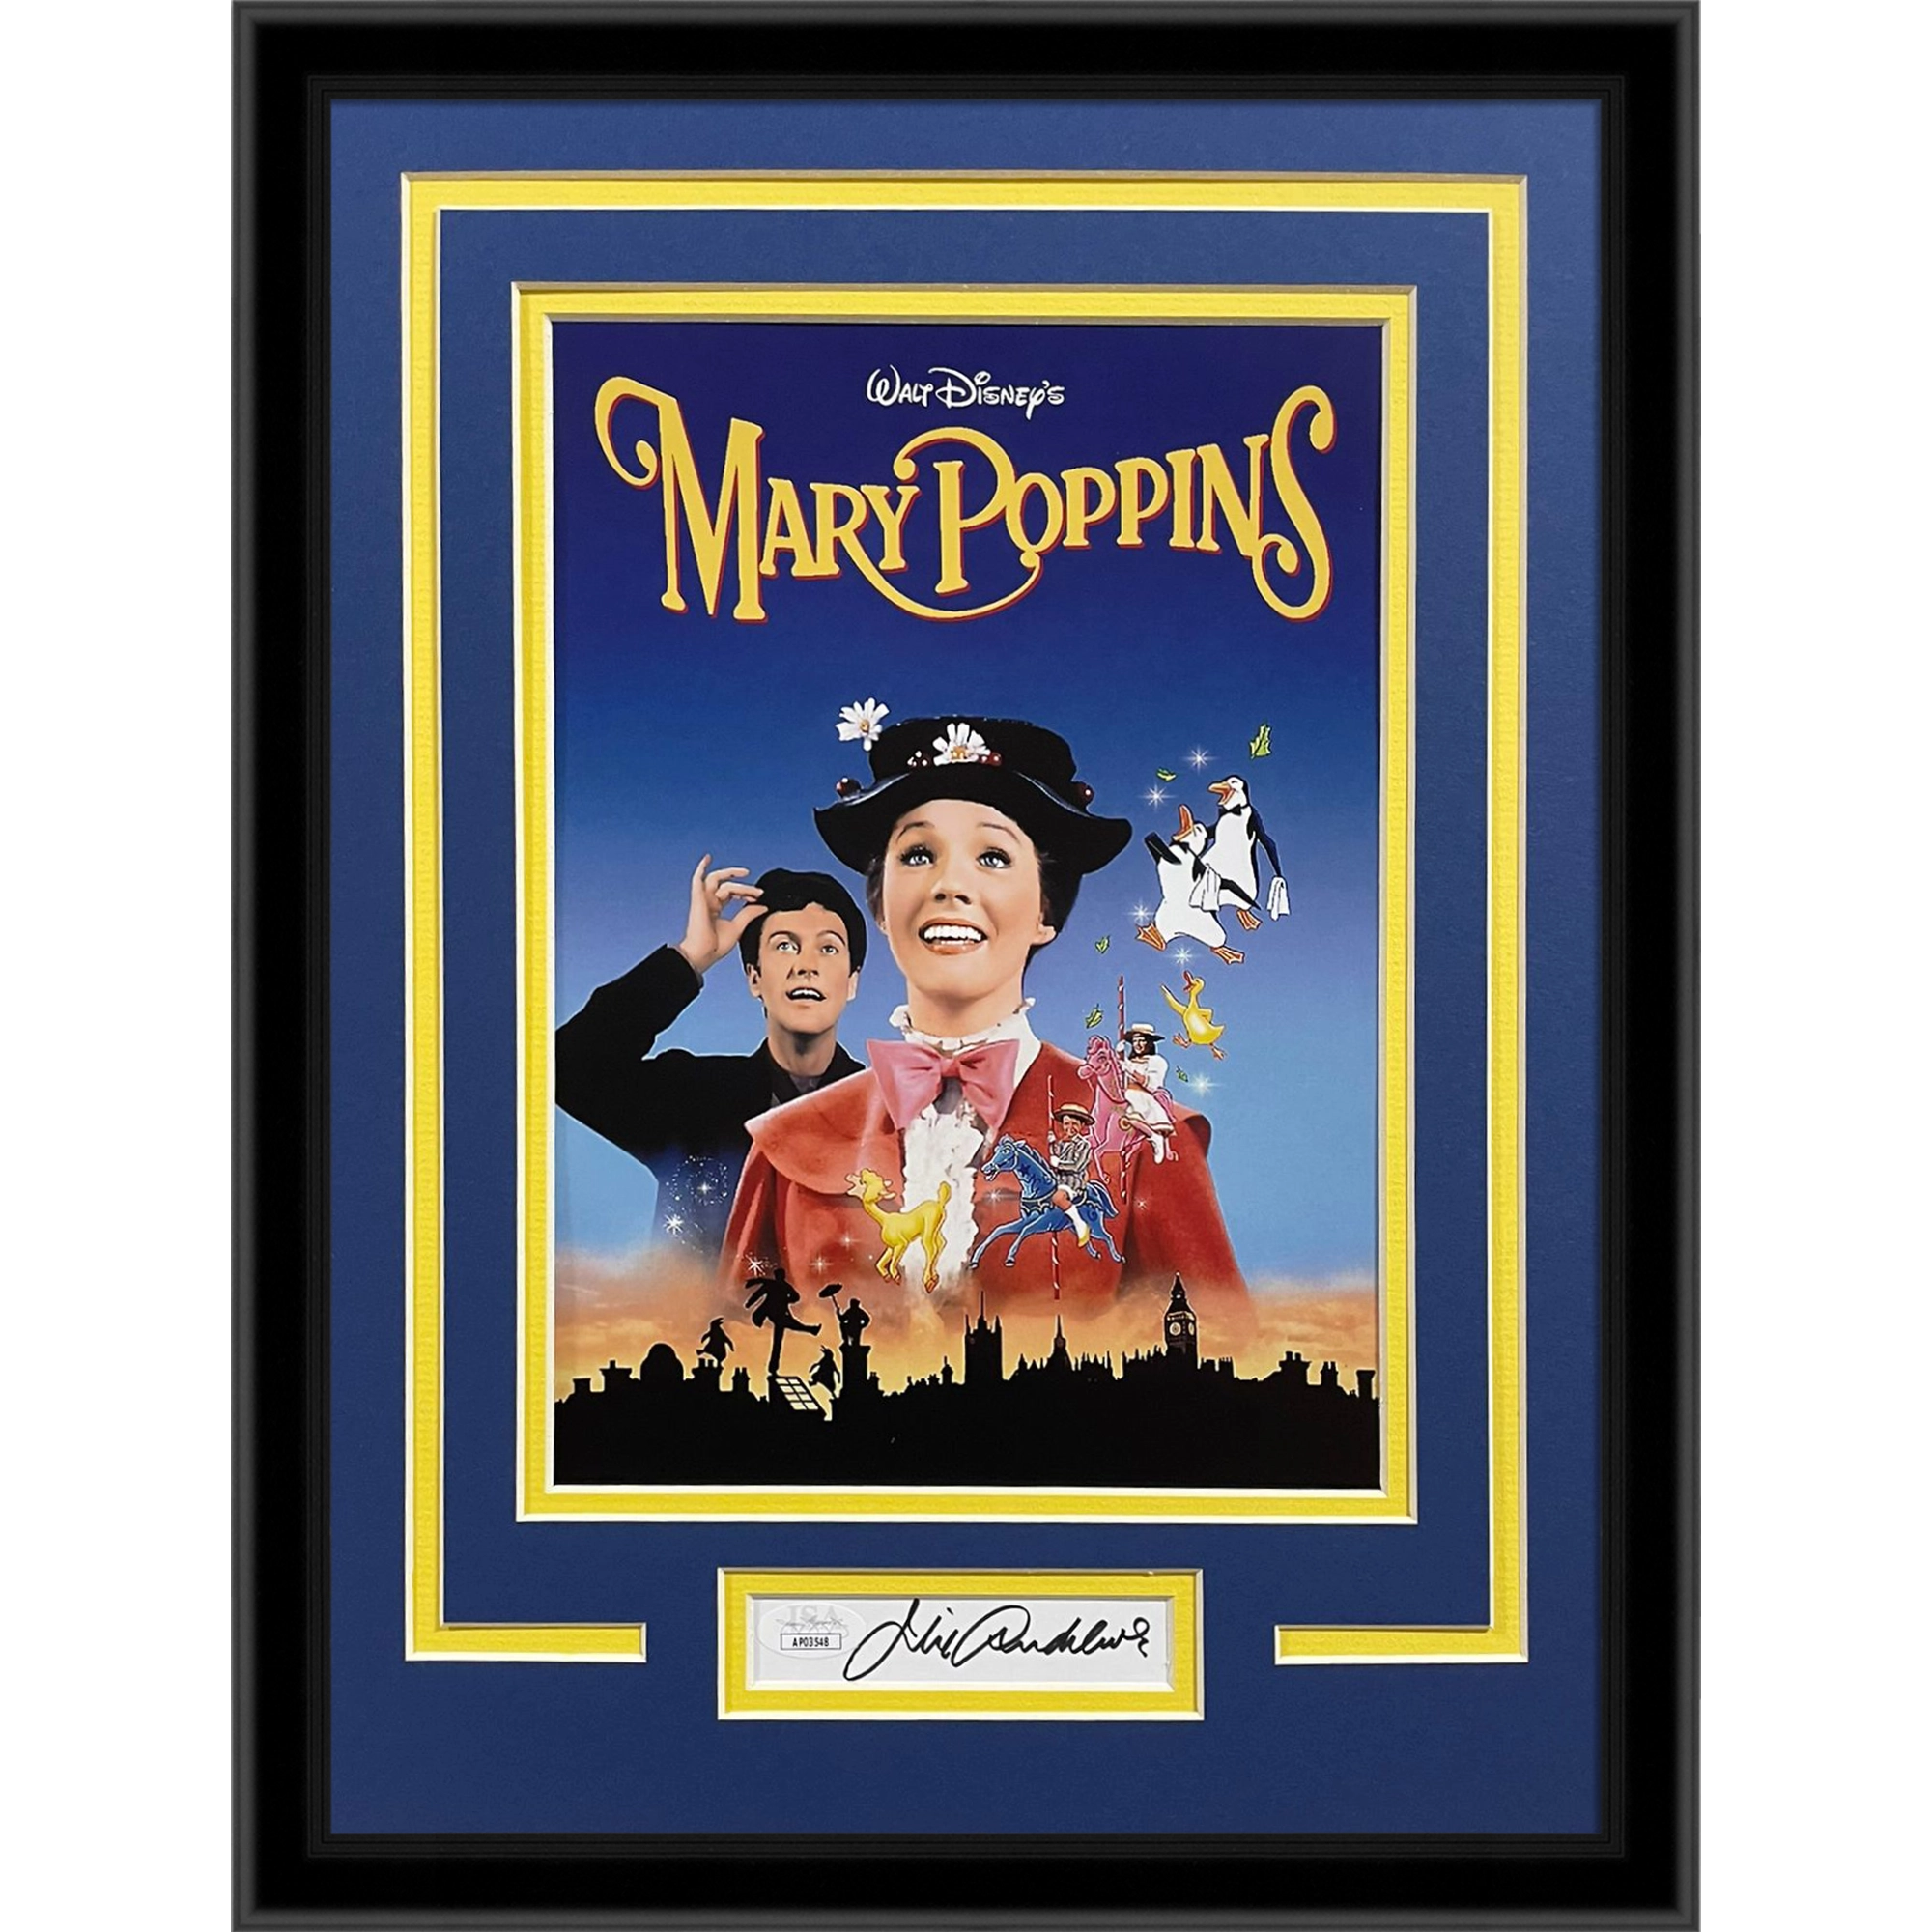 Mary Poppins 8x12 Movie Poster Deluxe Framed with Julie Andrews Autograph - JSA